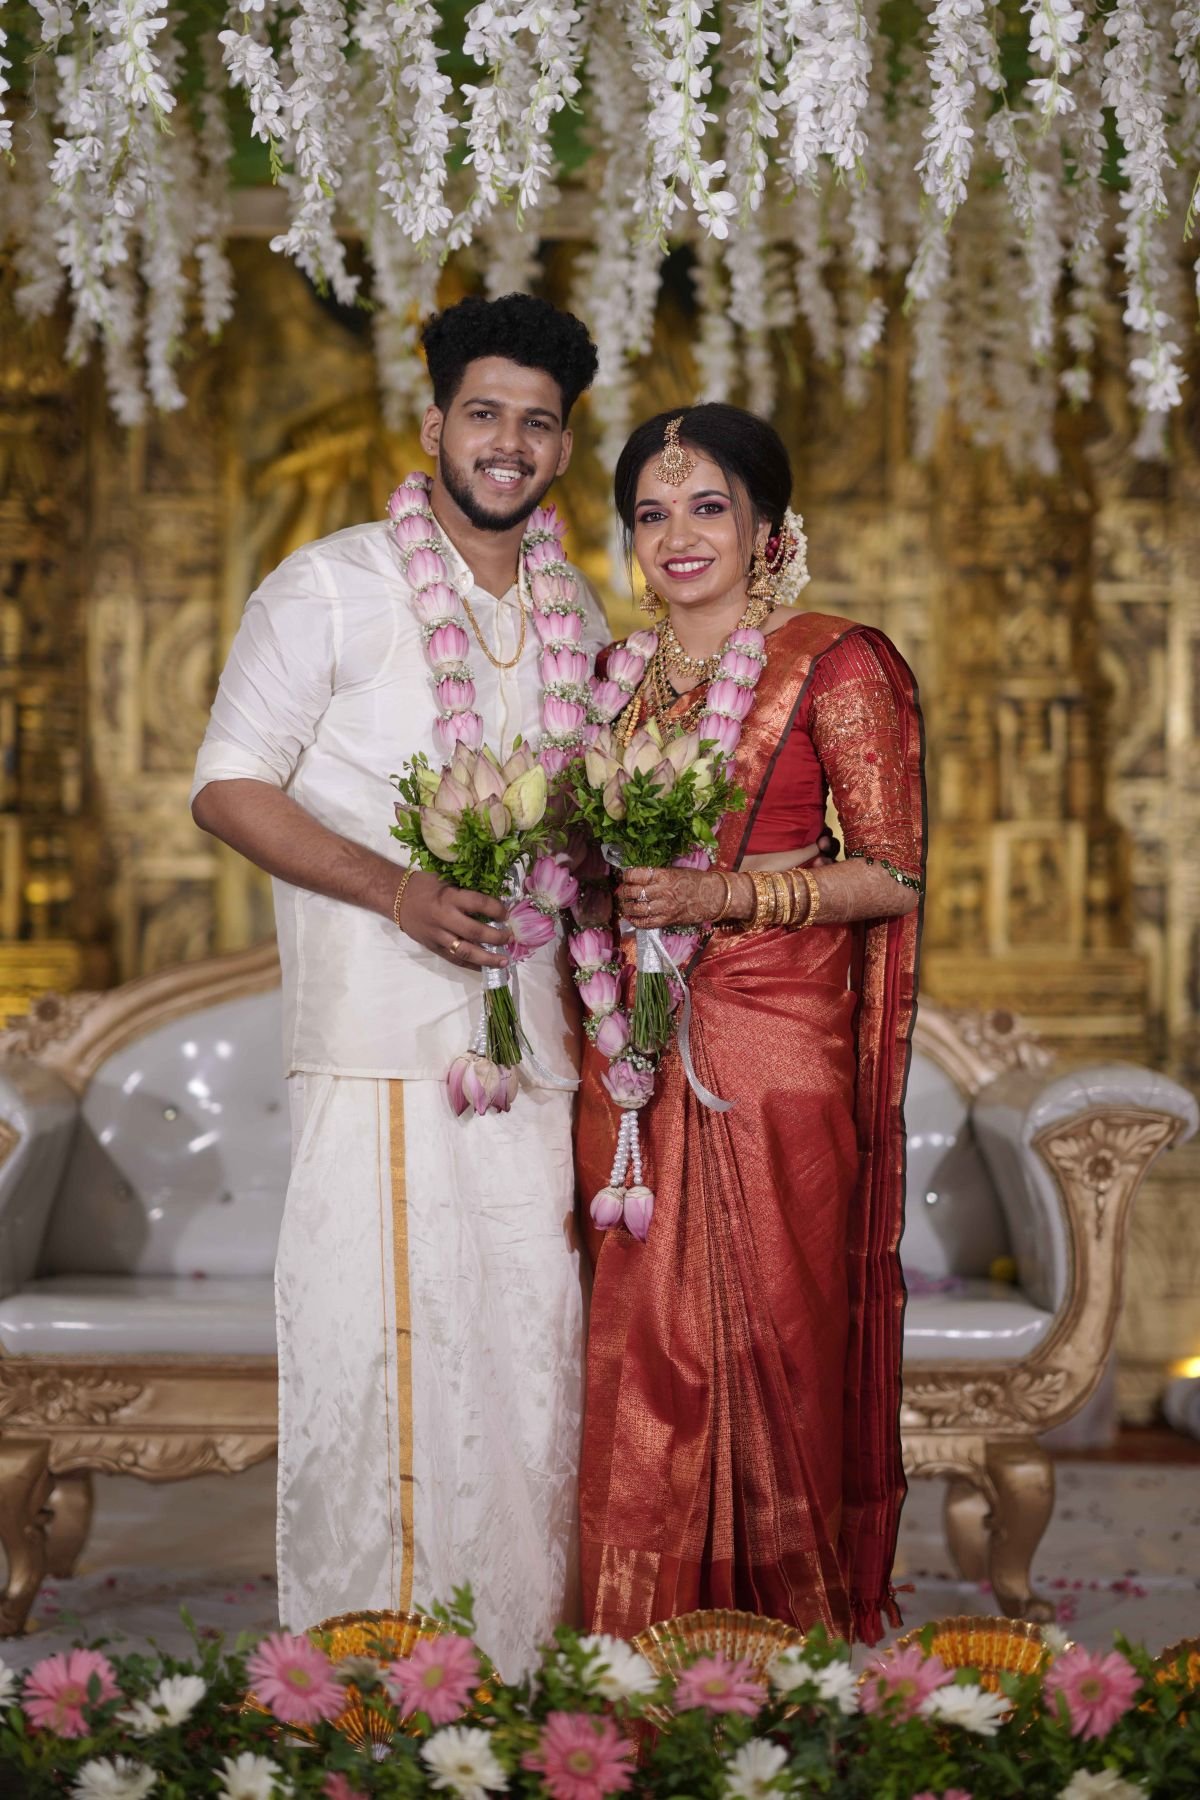 Witness The Harmony Of Customs And Love In Our Hindu Wedding.